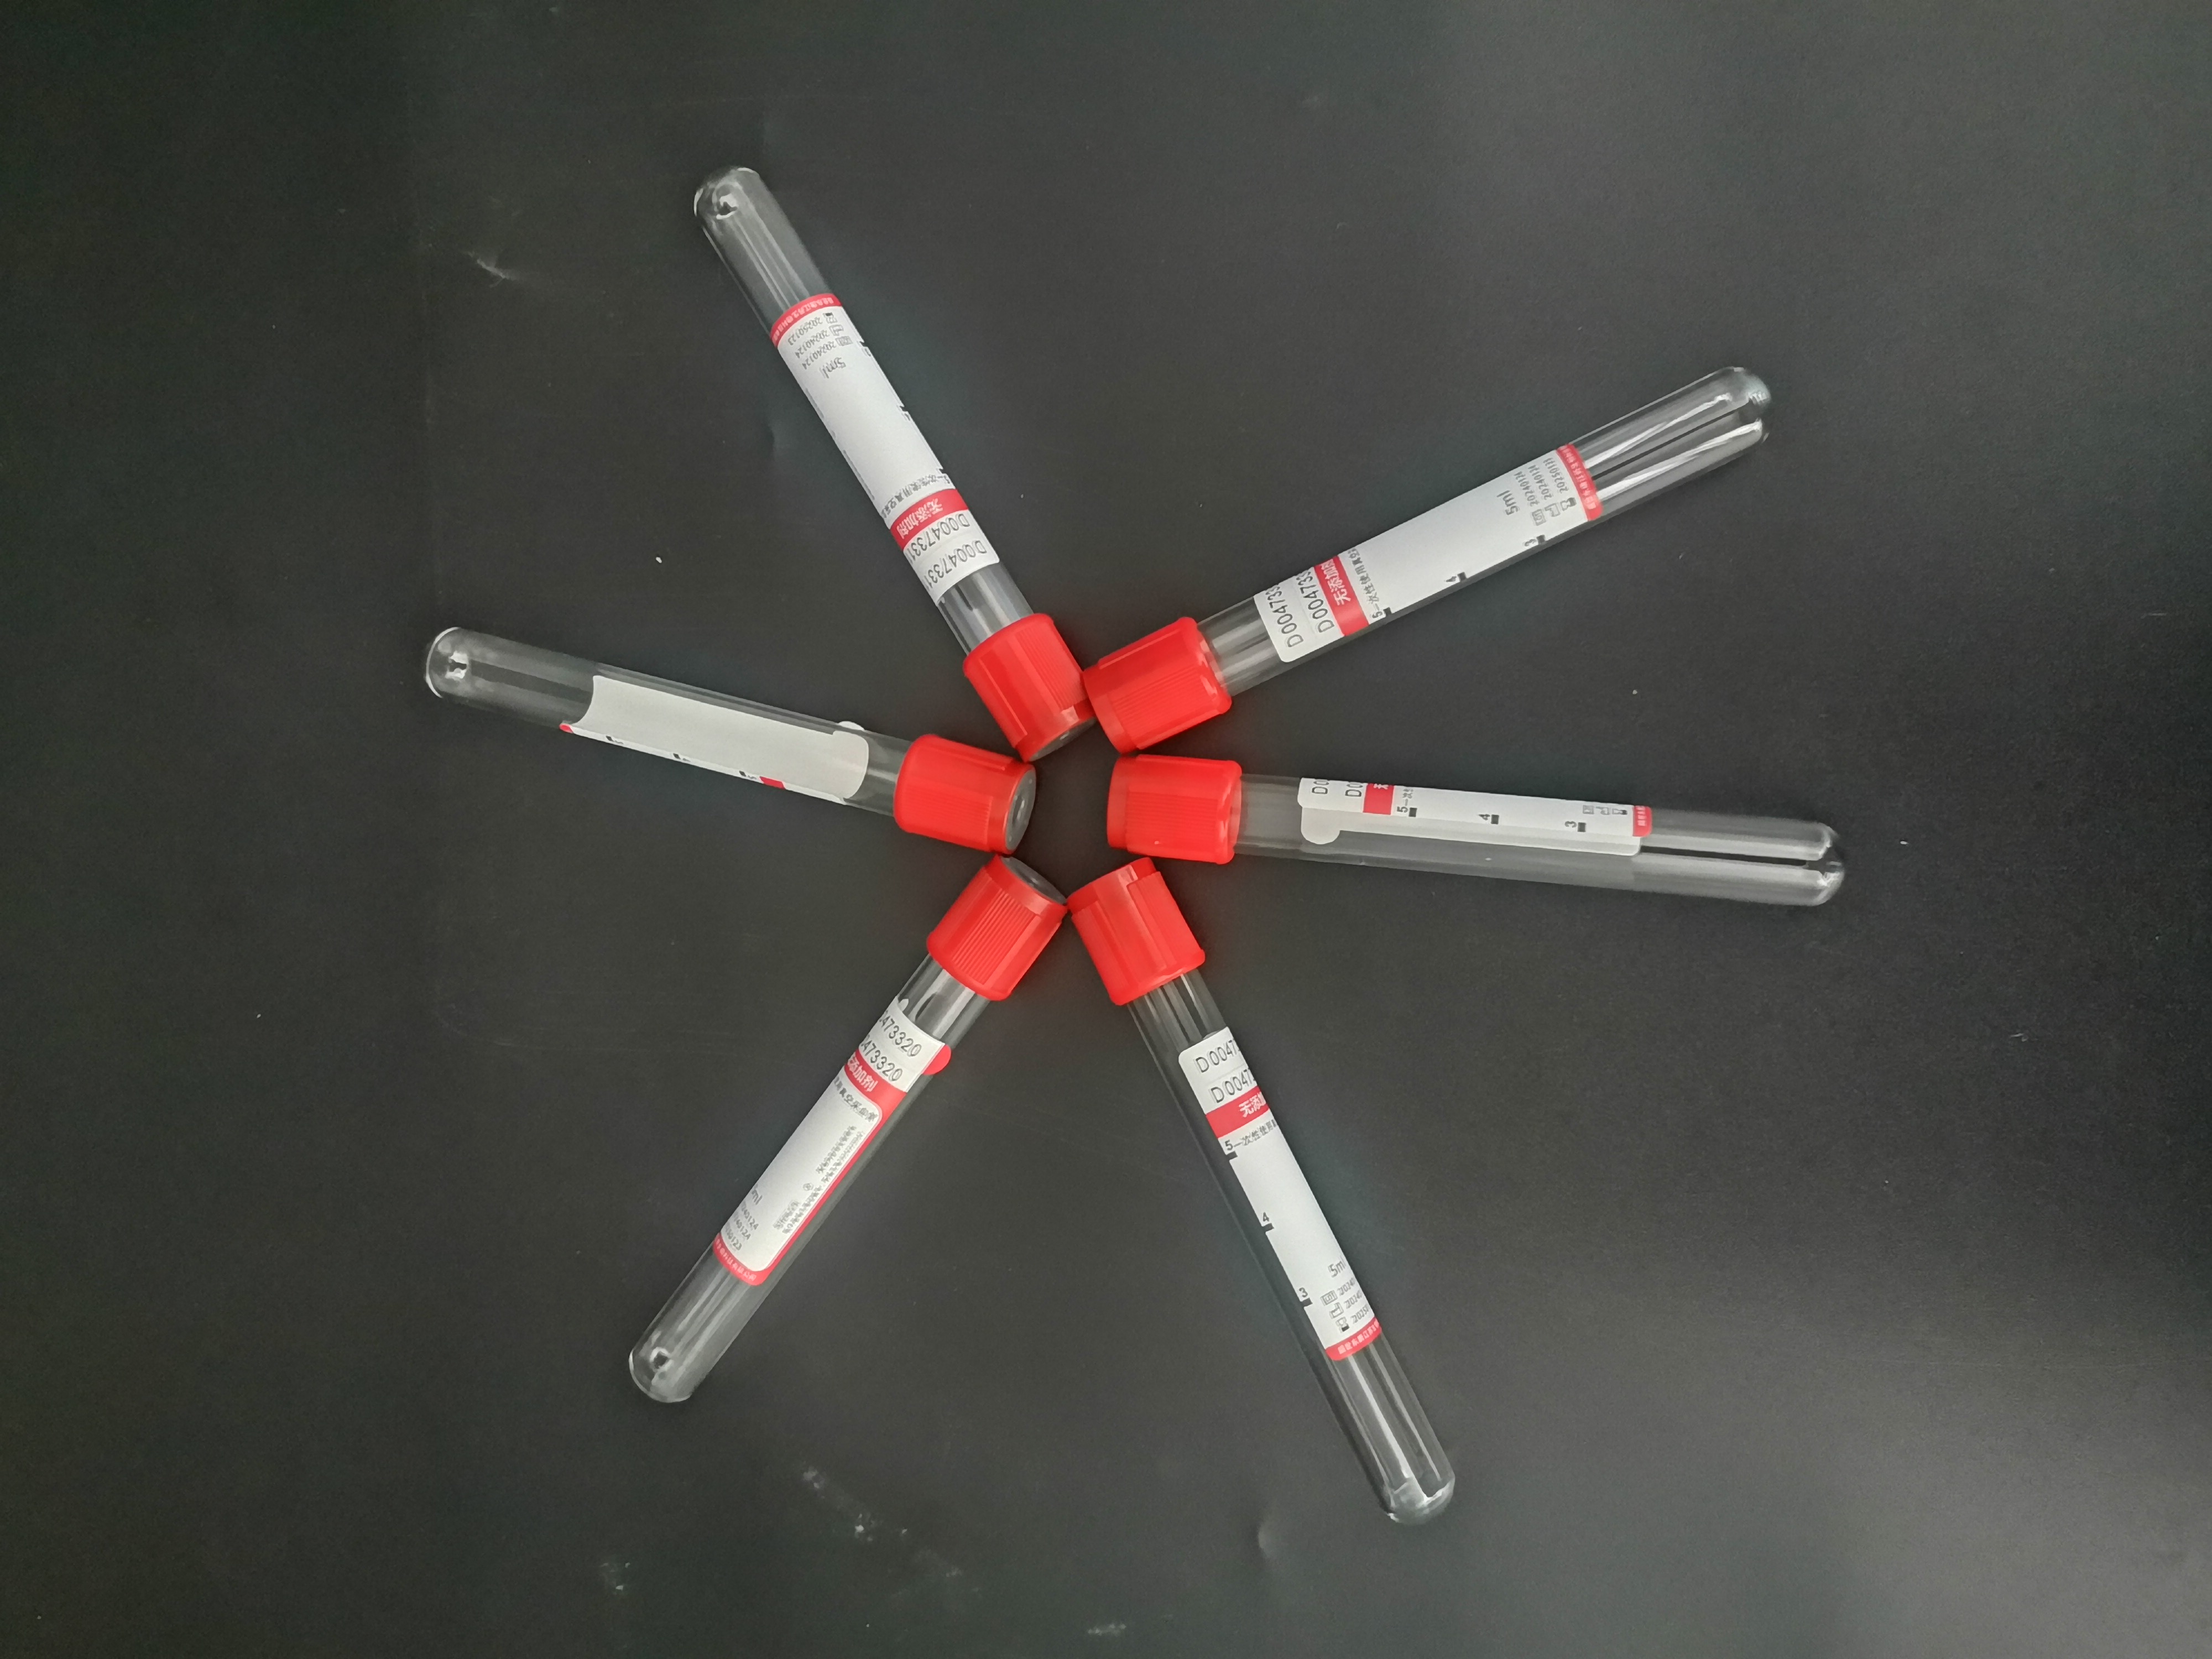 Red Cap Disposible Vacuum Blood Collection Tube Additive Free Tube